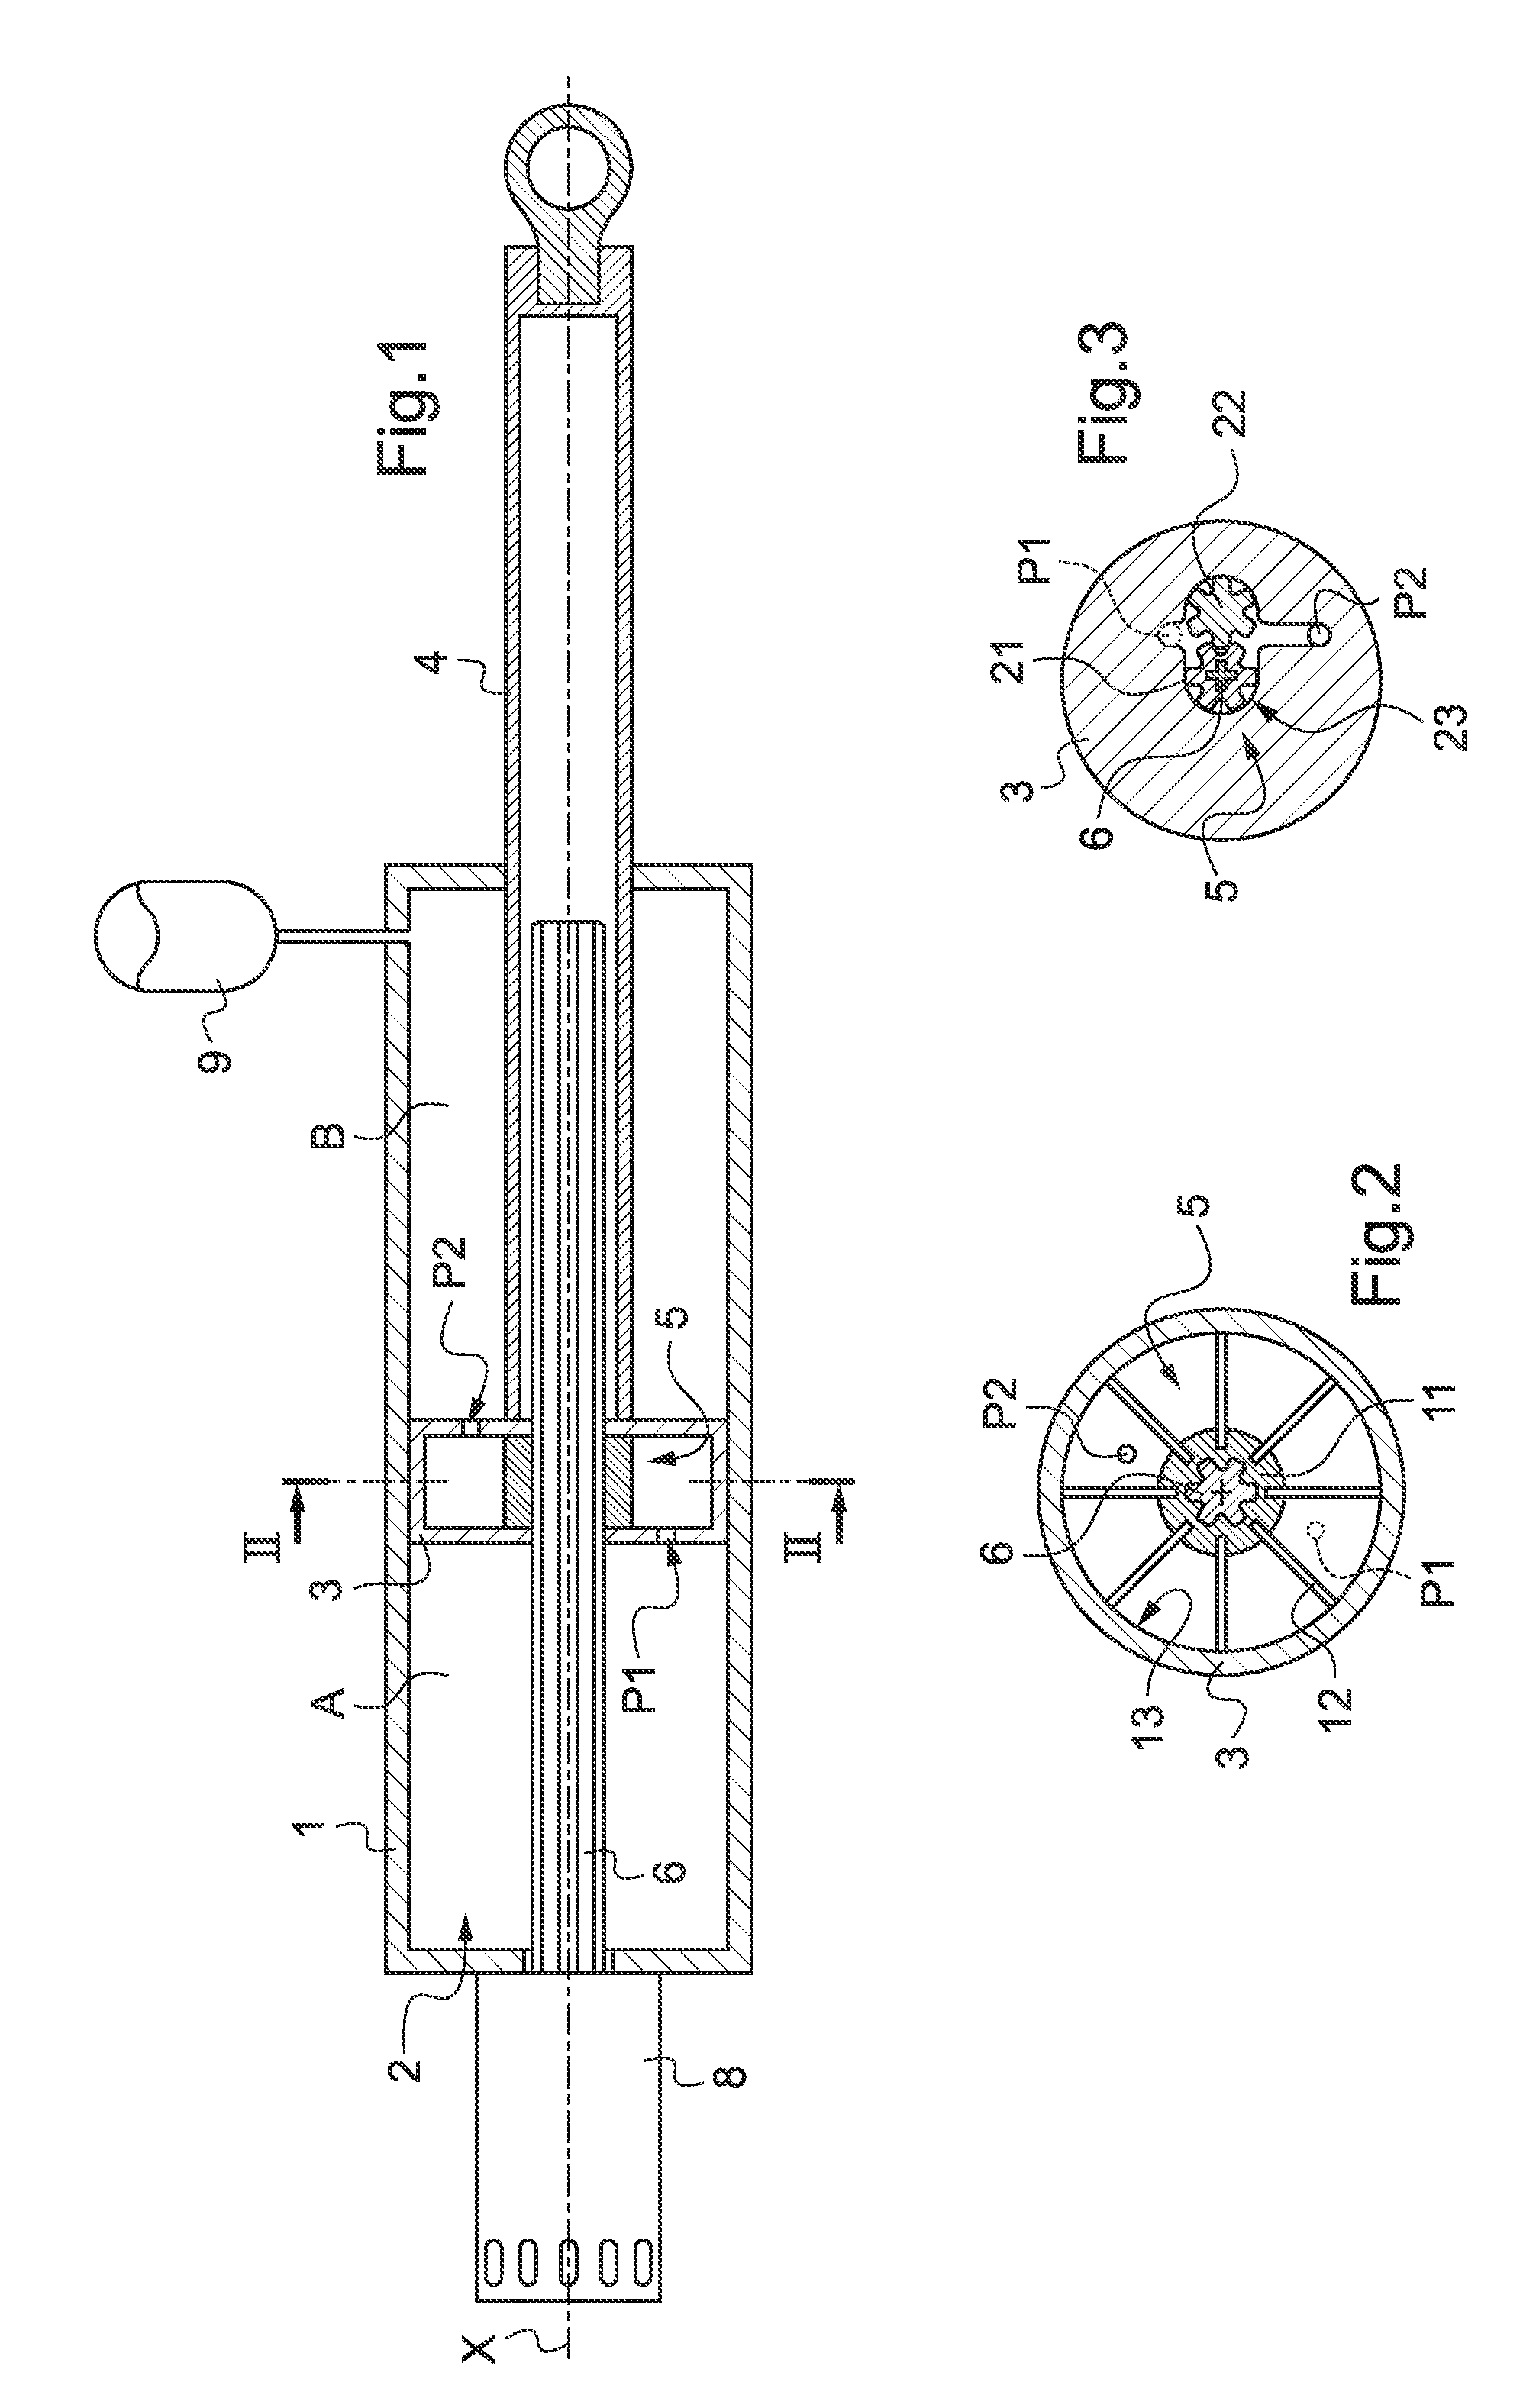 Electrohydraulic actuator with a pump incorporated in the piston